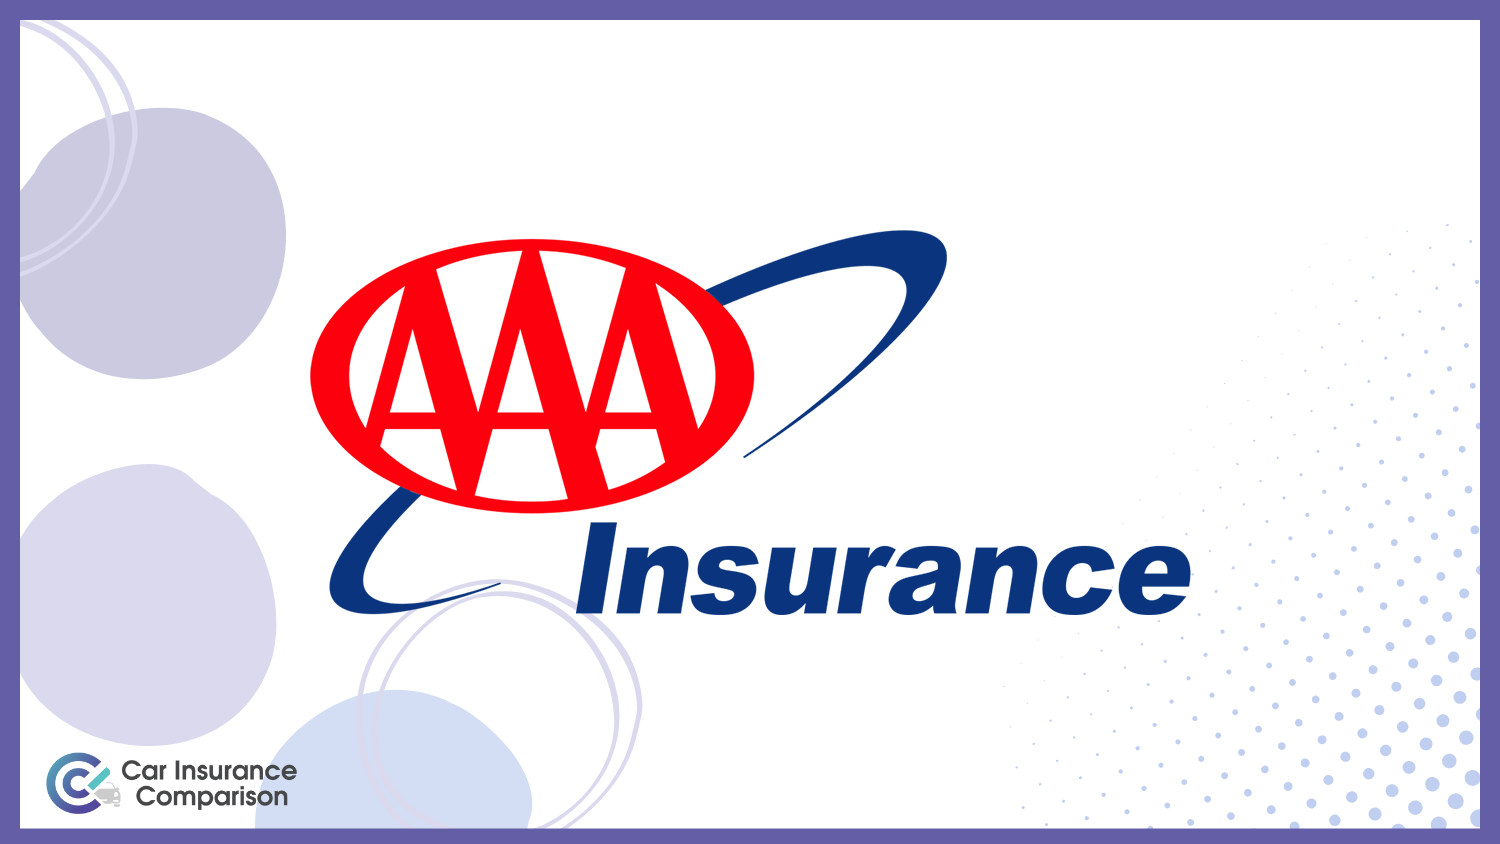 AAA: Best Chicago, IL Car Insurance